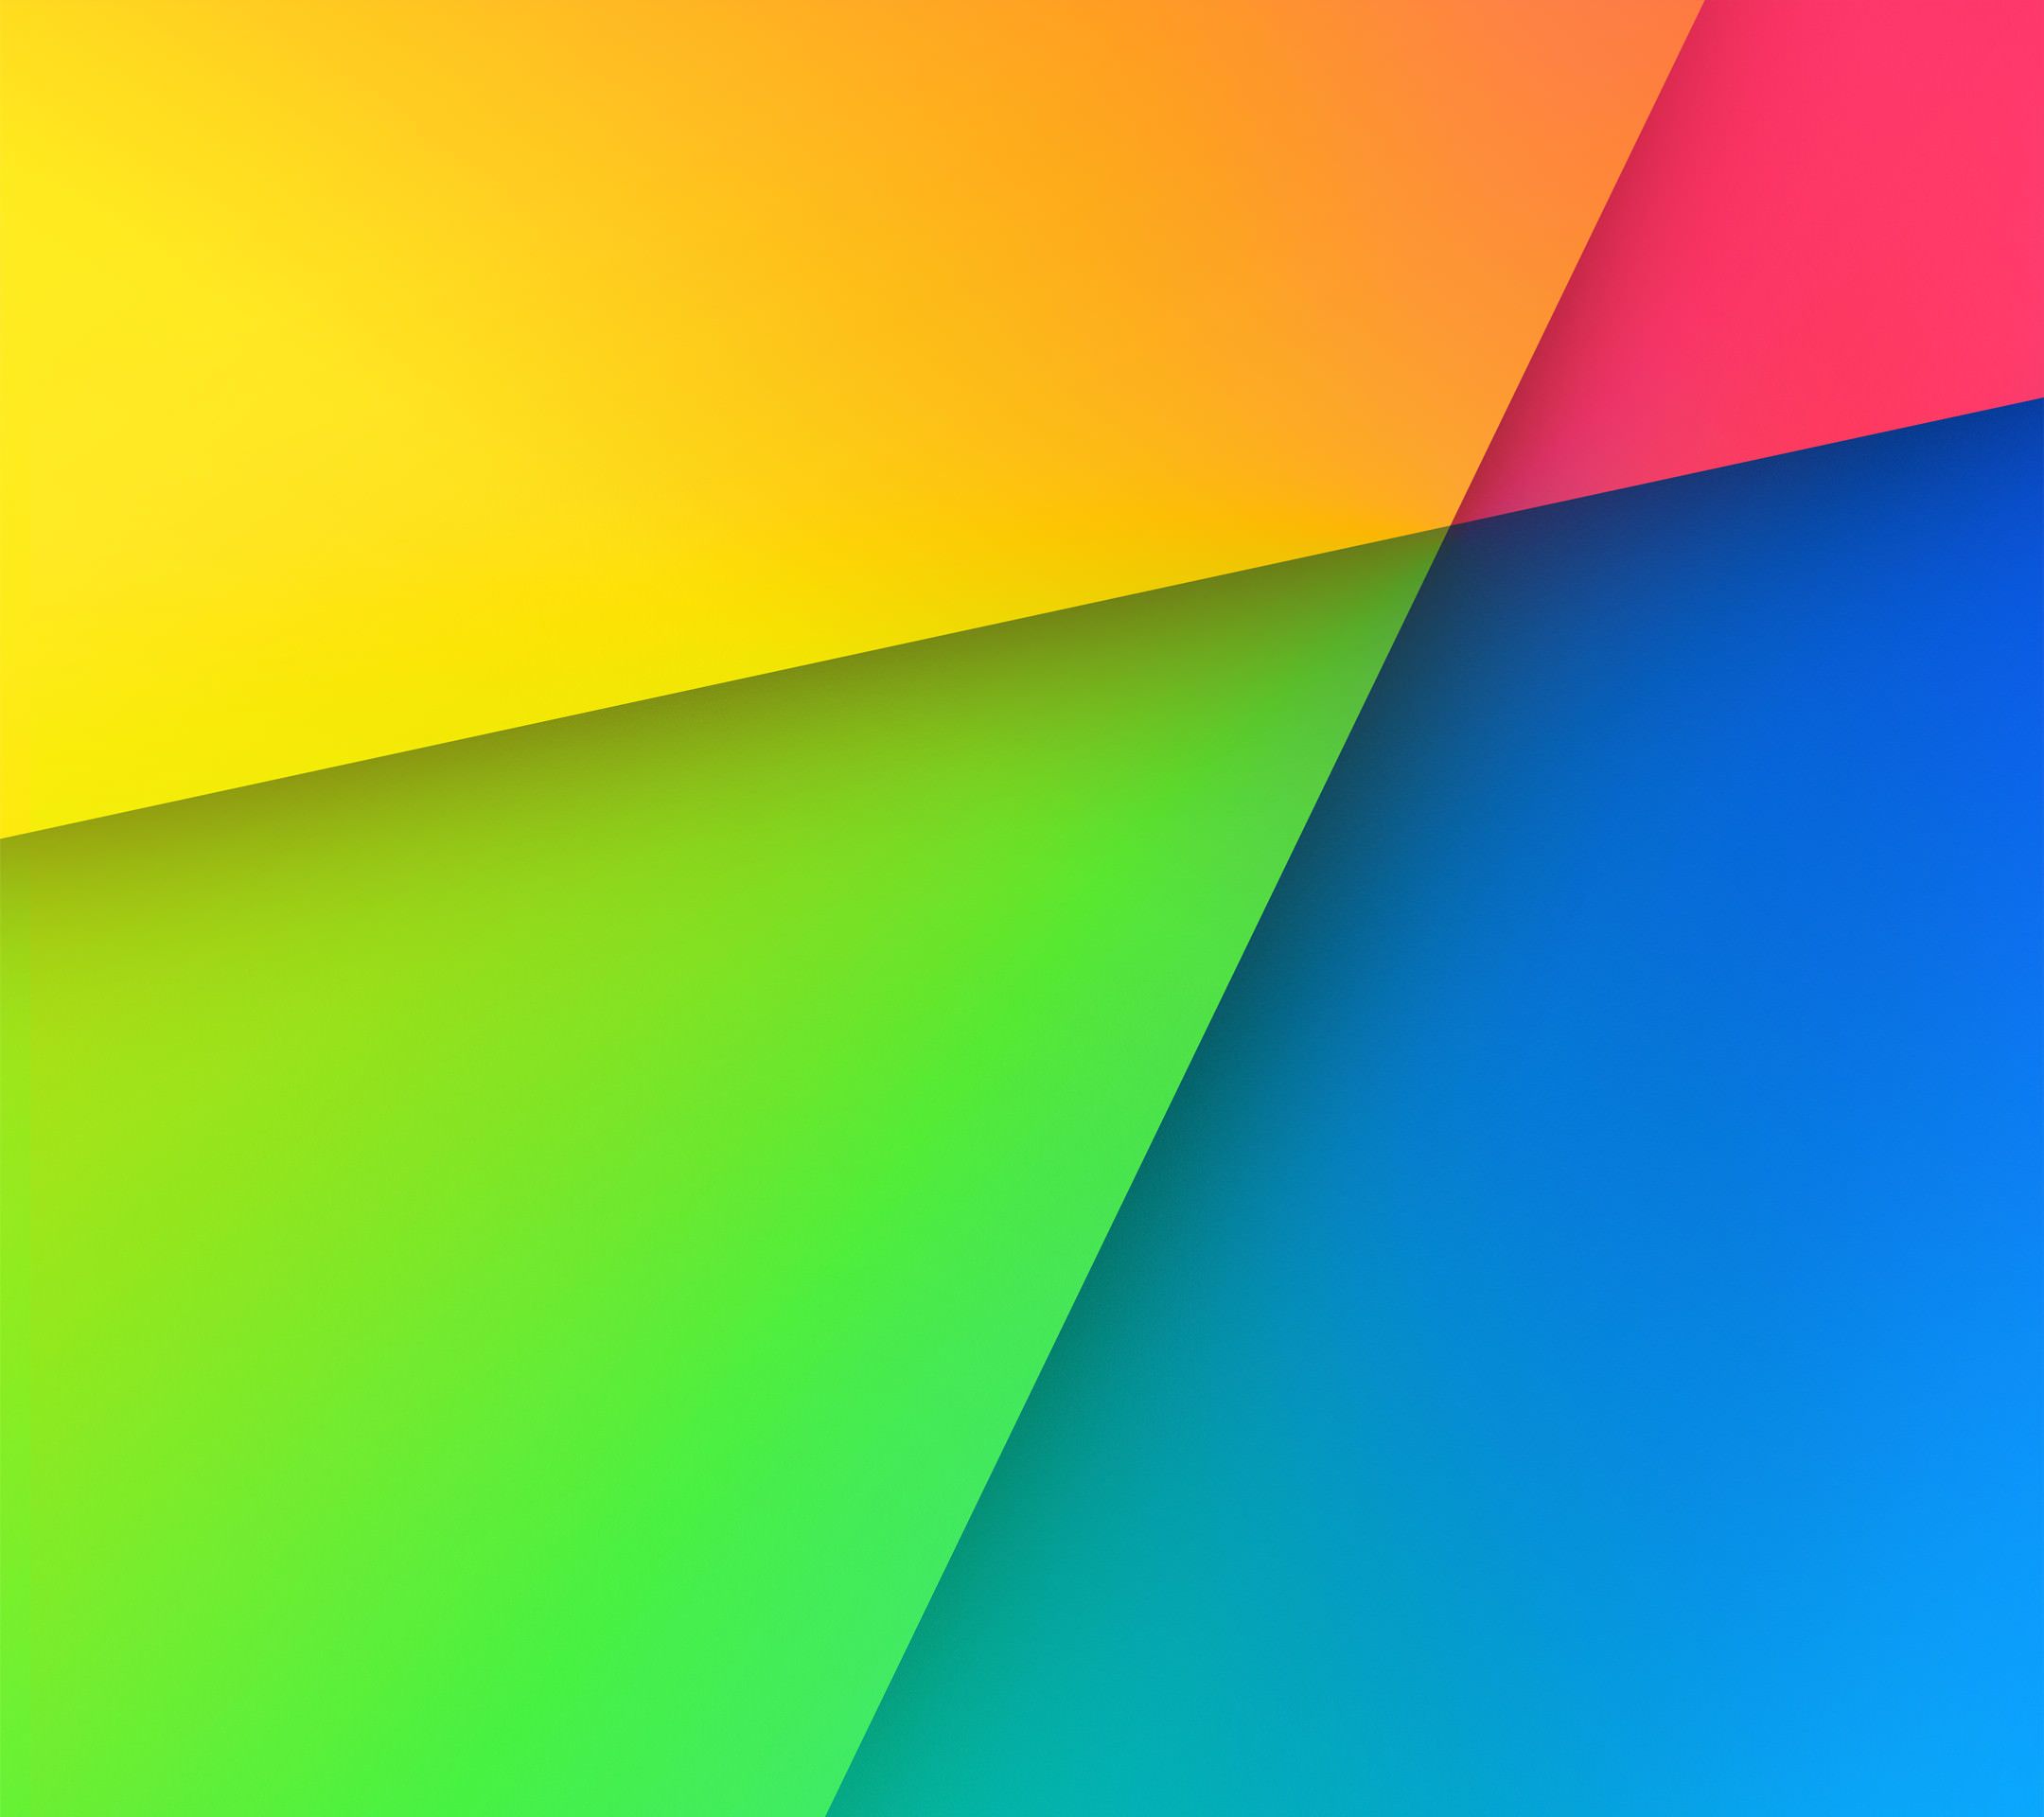 Colorful red, green and blue yellow. wallpaper.sc SmartPhone. Best wallpaper android, Android wallpaper, HD wallpaper